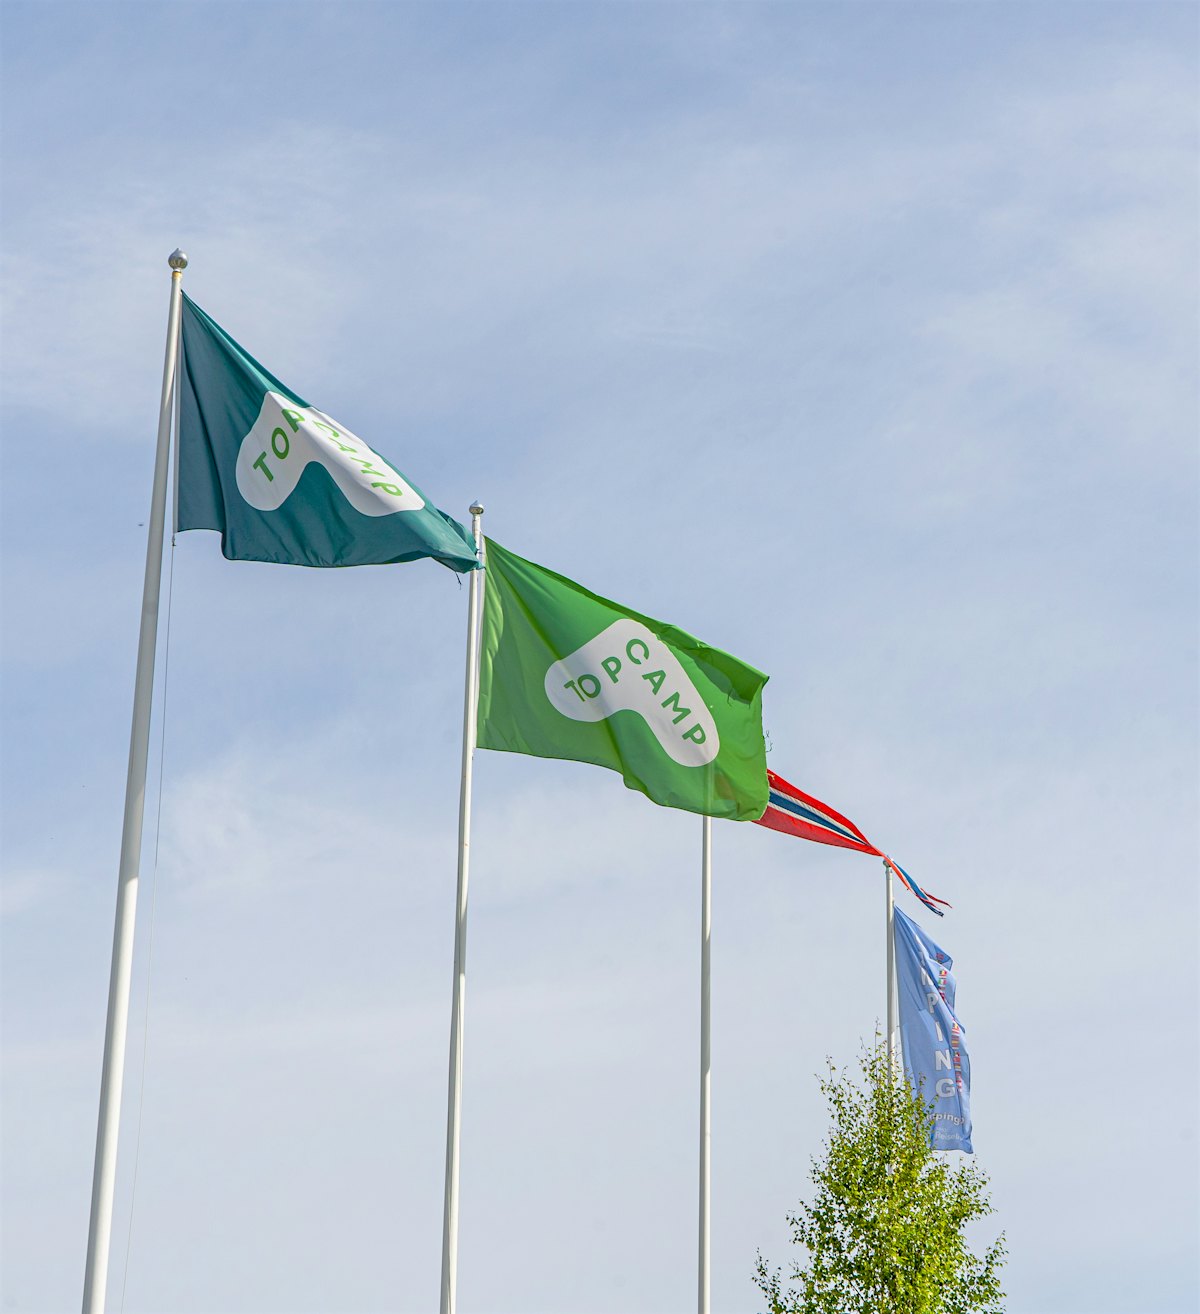 Two Topcamp flags and a Norway pennant on flagpoles. Photo